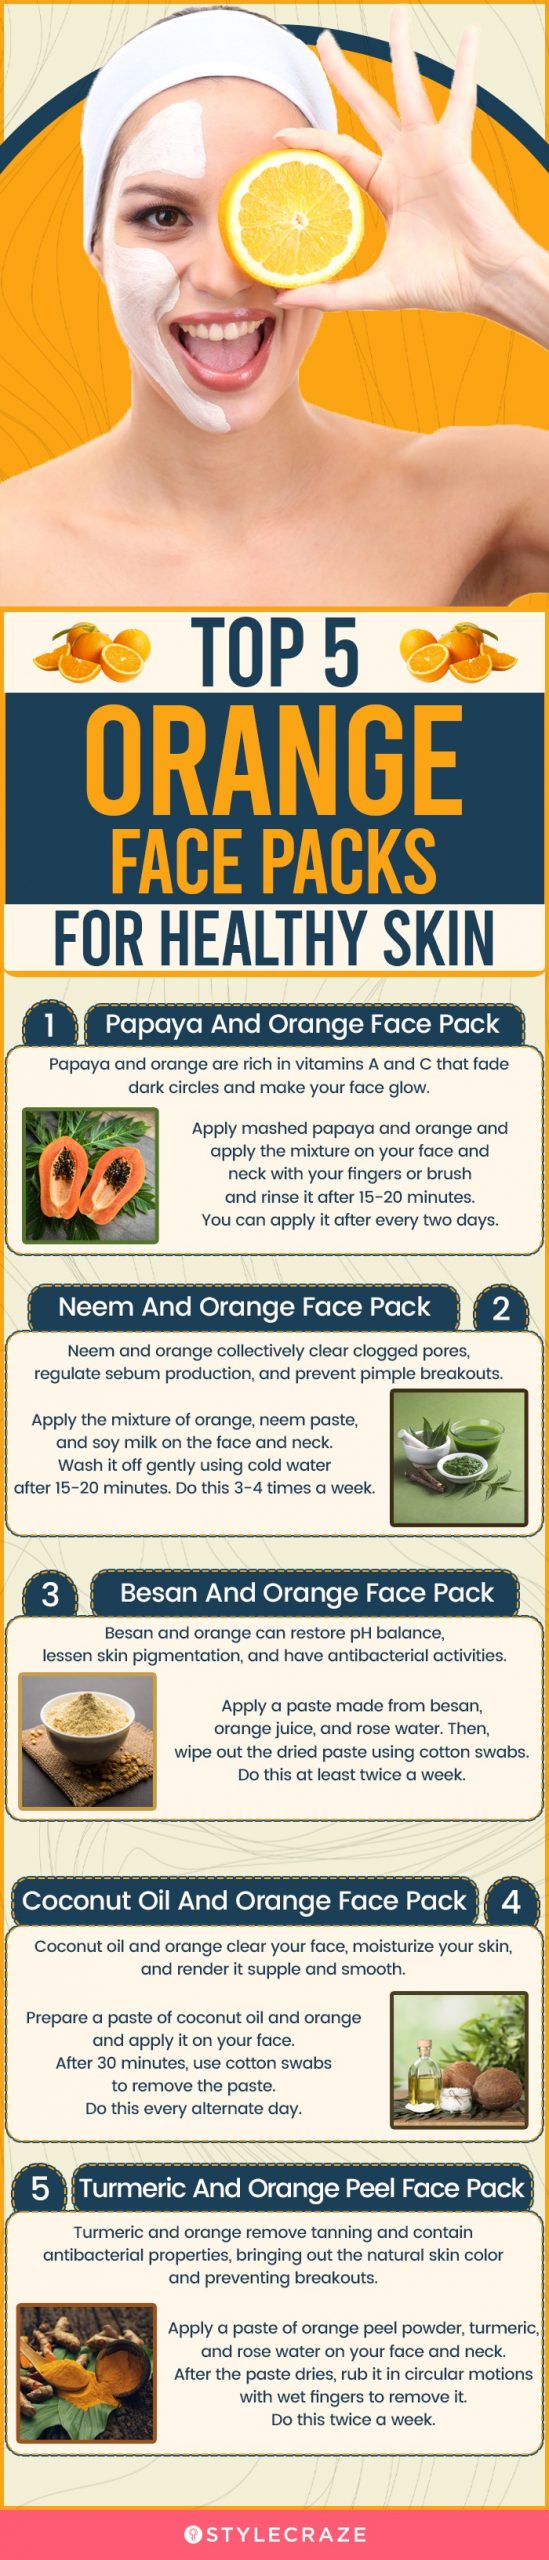 top 5 orange face packs for healthy skin (infographic)